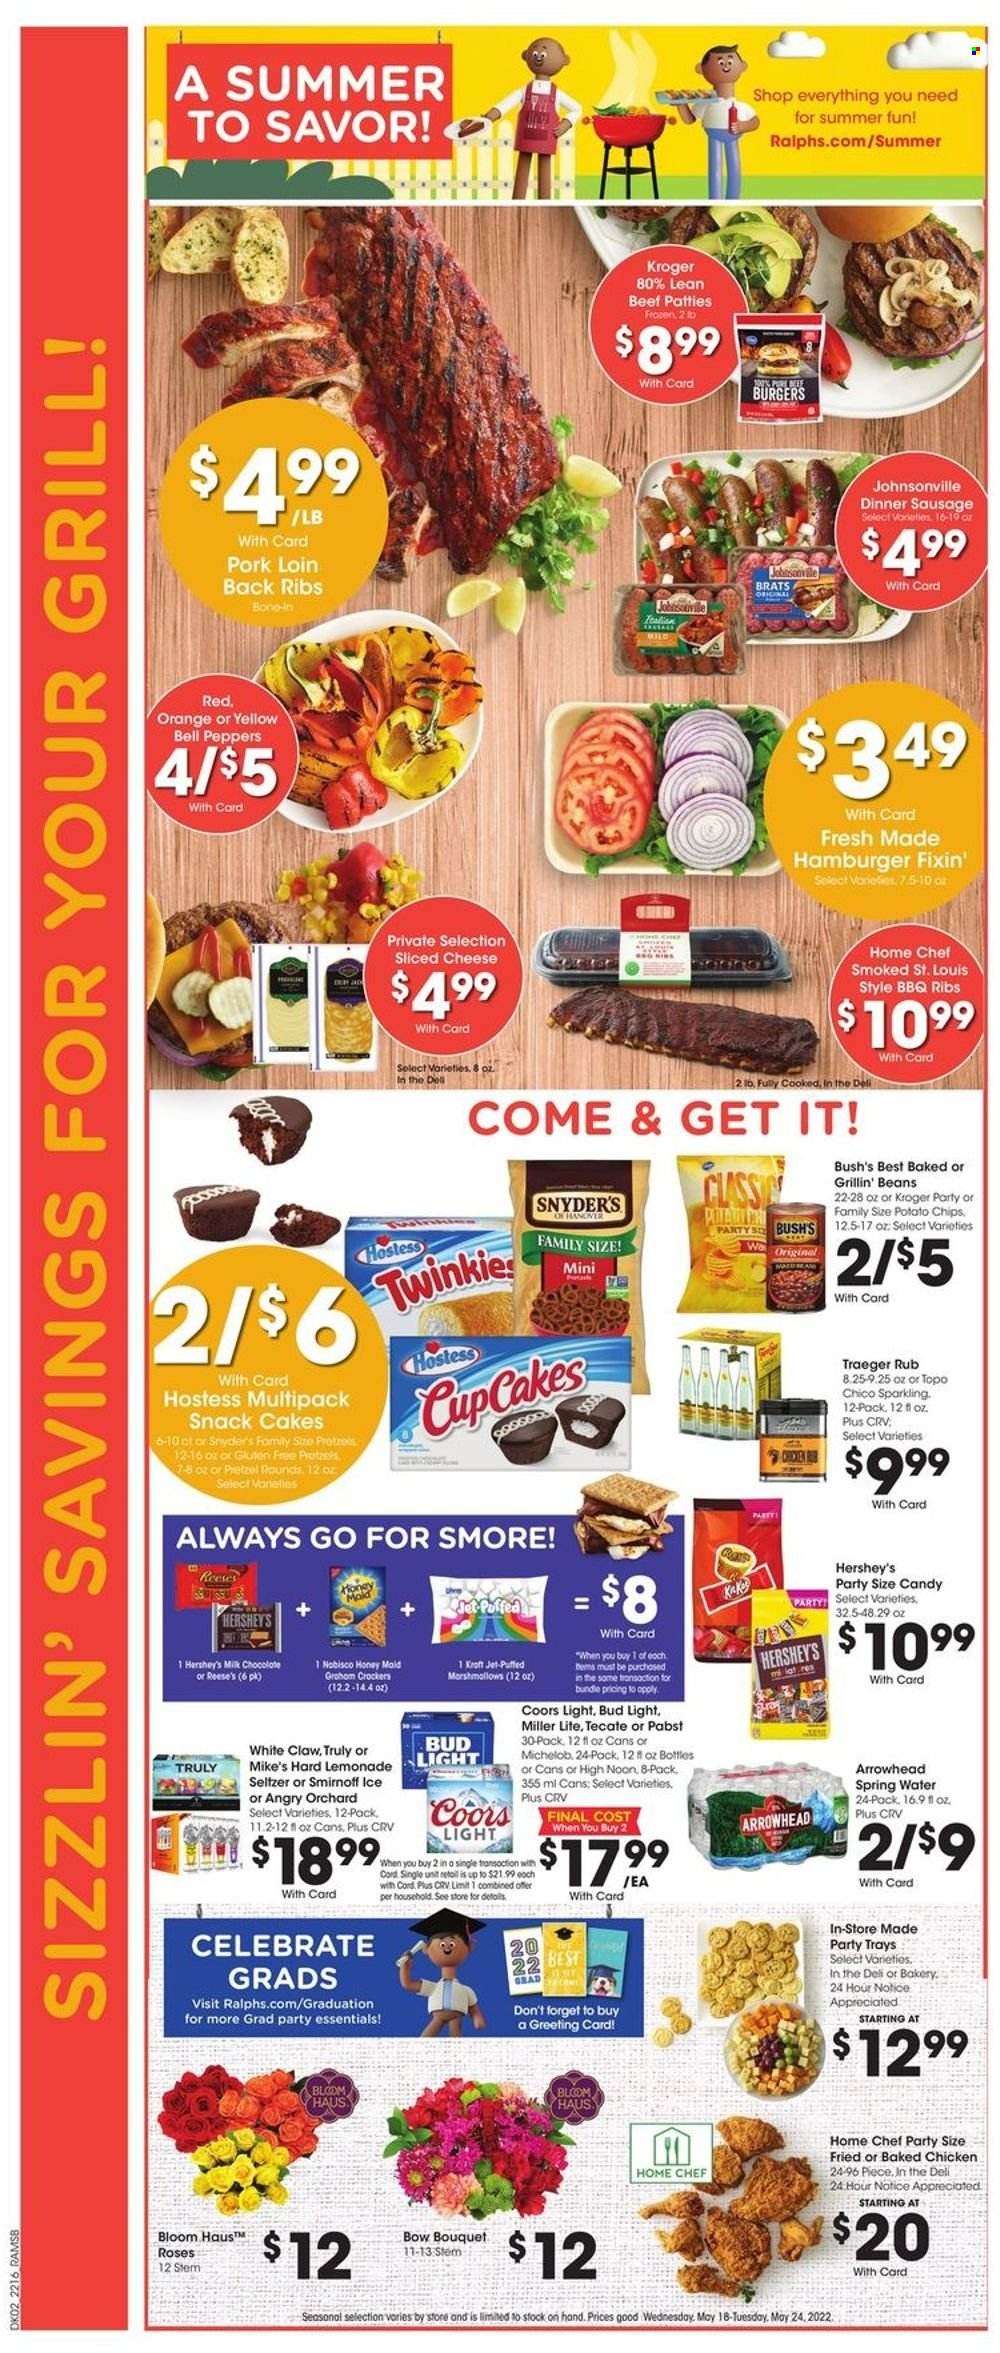 thumbnail - Ralphs Flyer - 05/18/2022 - 05/24/2022 - Sales products - pretzels, cake, beans, bell peppers, peppers, oranges, hamburger, Johnsonville, sausage, sliced cheese, cheese, Reese's, Hershey's, snack, potato chips, honey, lemonade, seltzer water, spring water, Smirnoff, White Claw, TRULY, beer, Bud Light, beef meat, pork loin, pork meat, Jet, grill, bouquet, rose, Miller Lite, Coors, Michelob. Page 4.